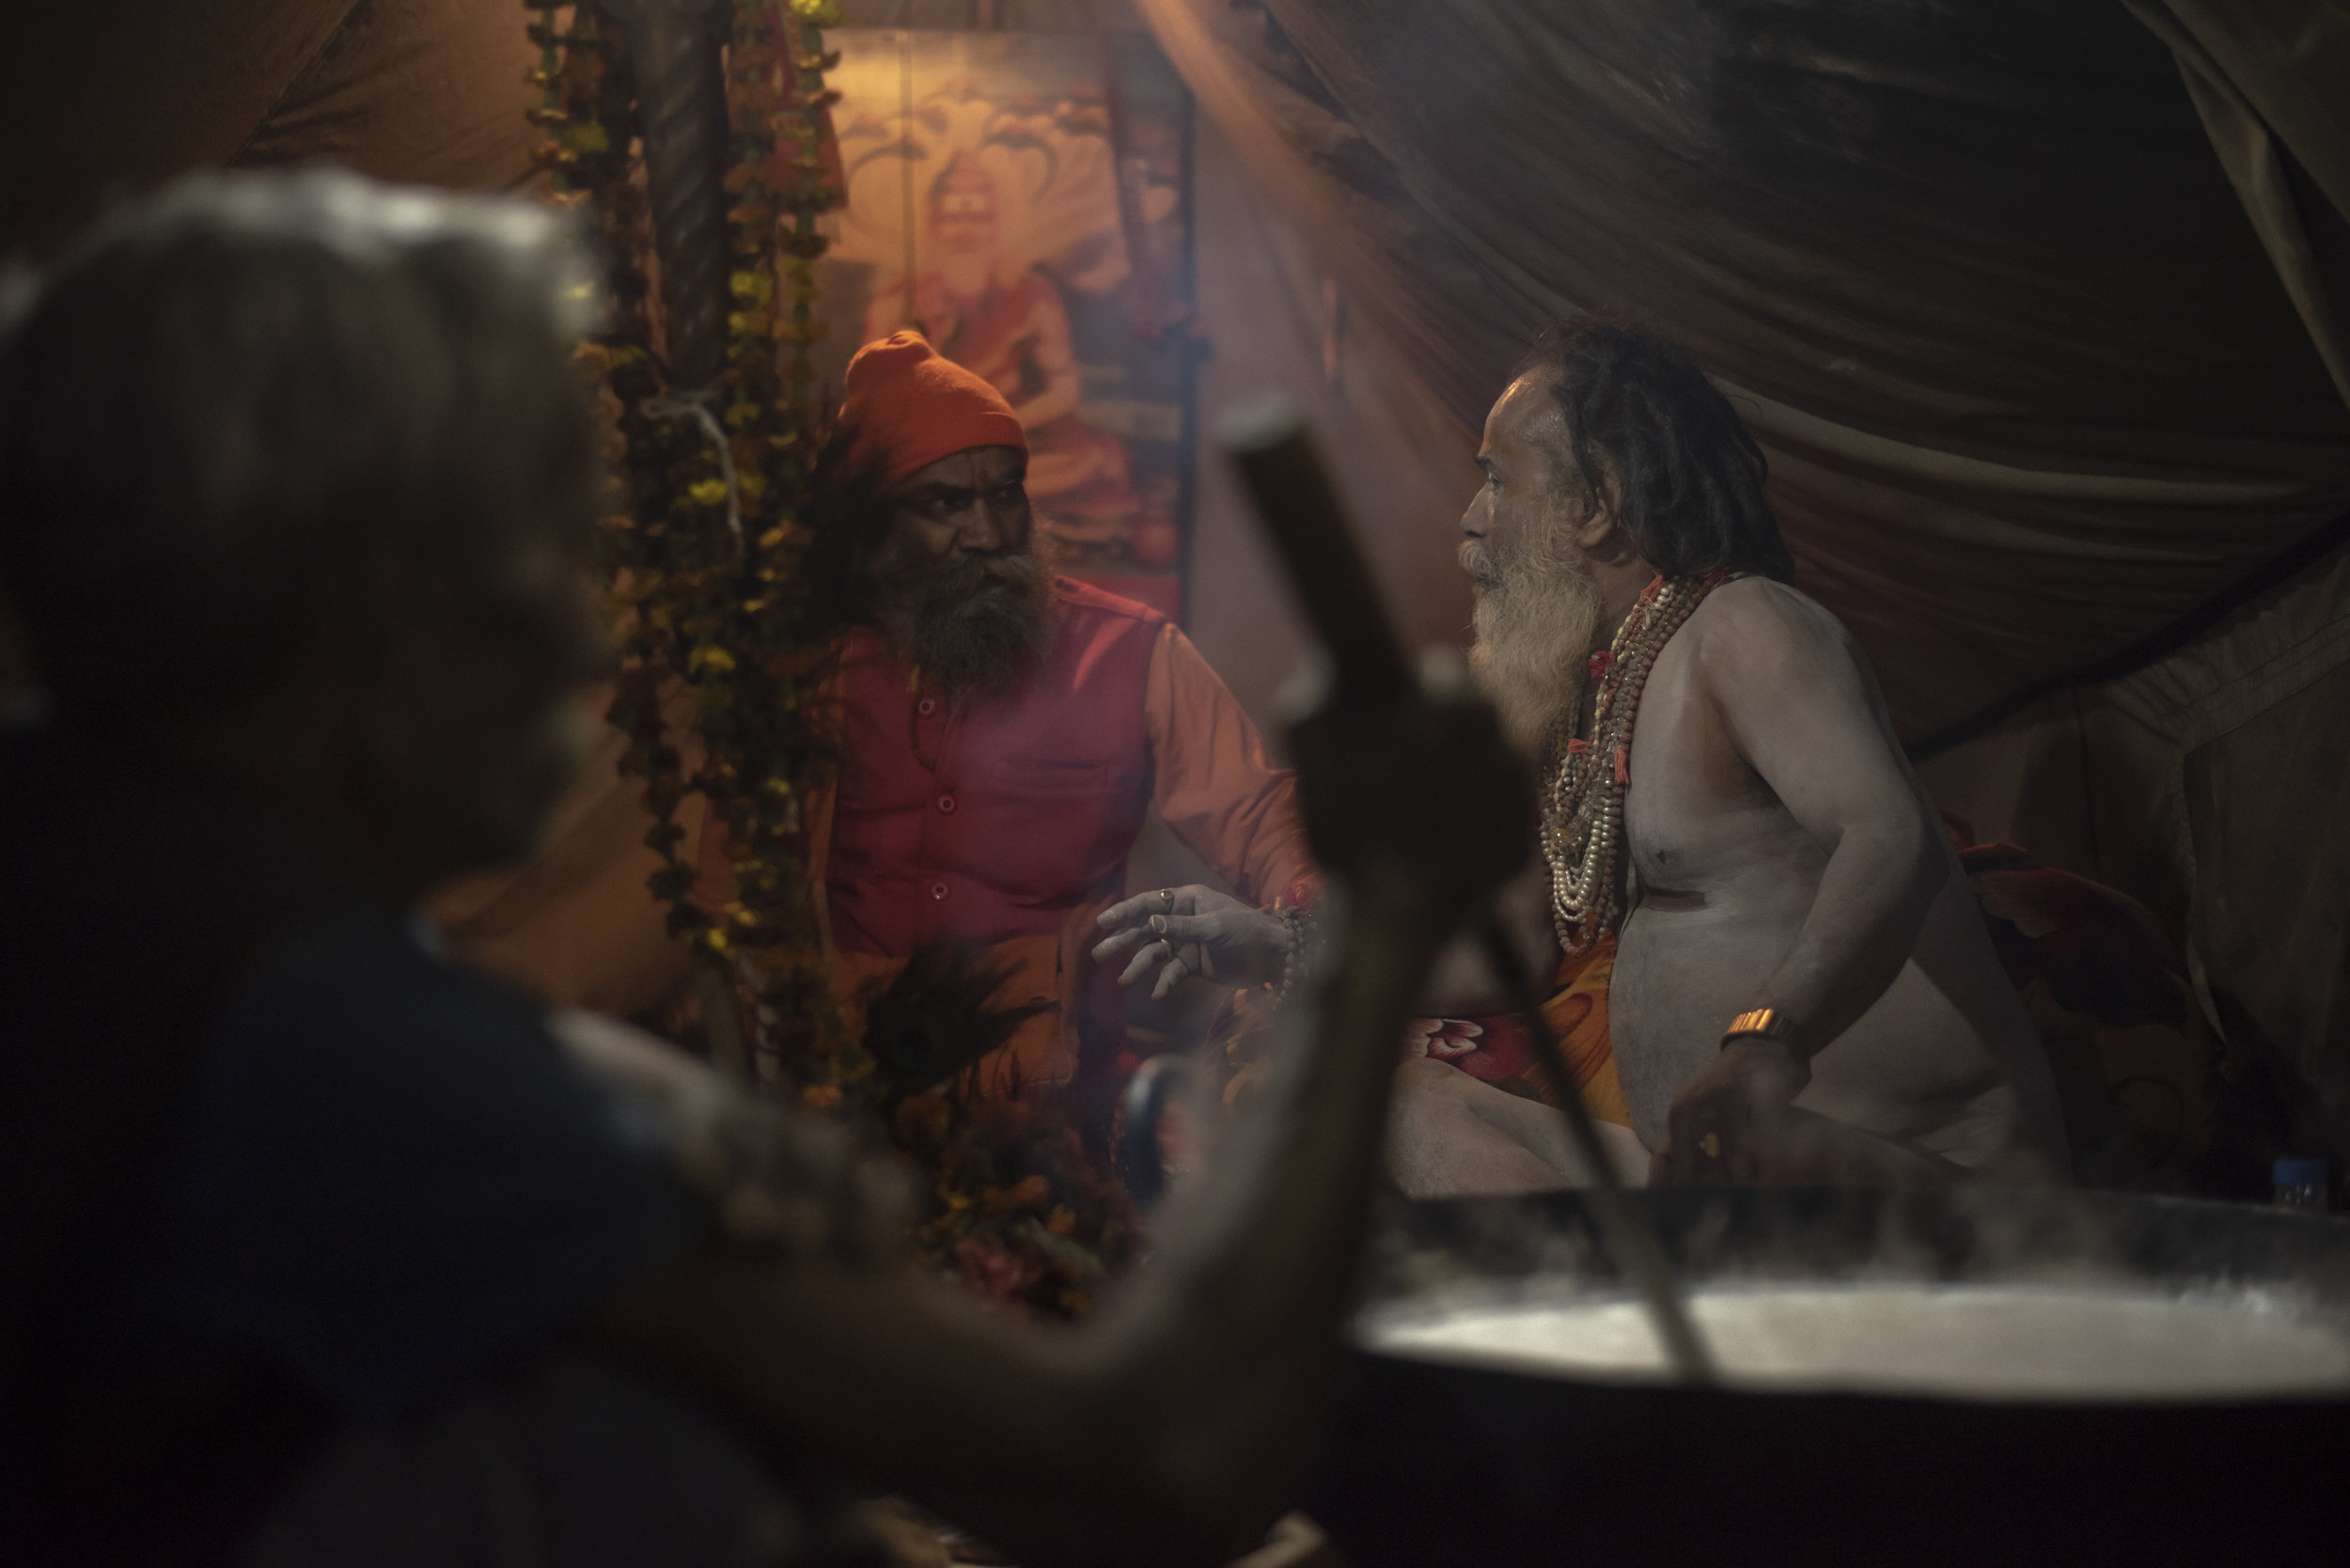  Two sadhu’s (Hindu sages/priests) converse while a man stirs a giant kettle of milk representing the Samudra Manthan, an auspicious ocean of milk from Vedic mythology. 